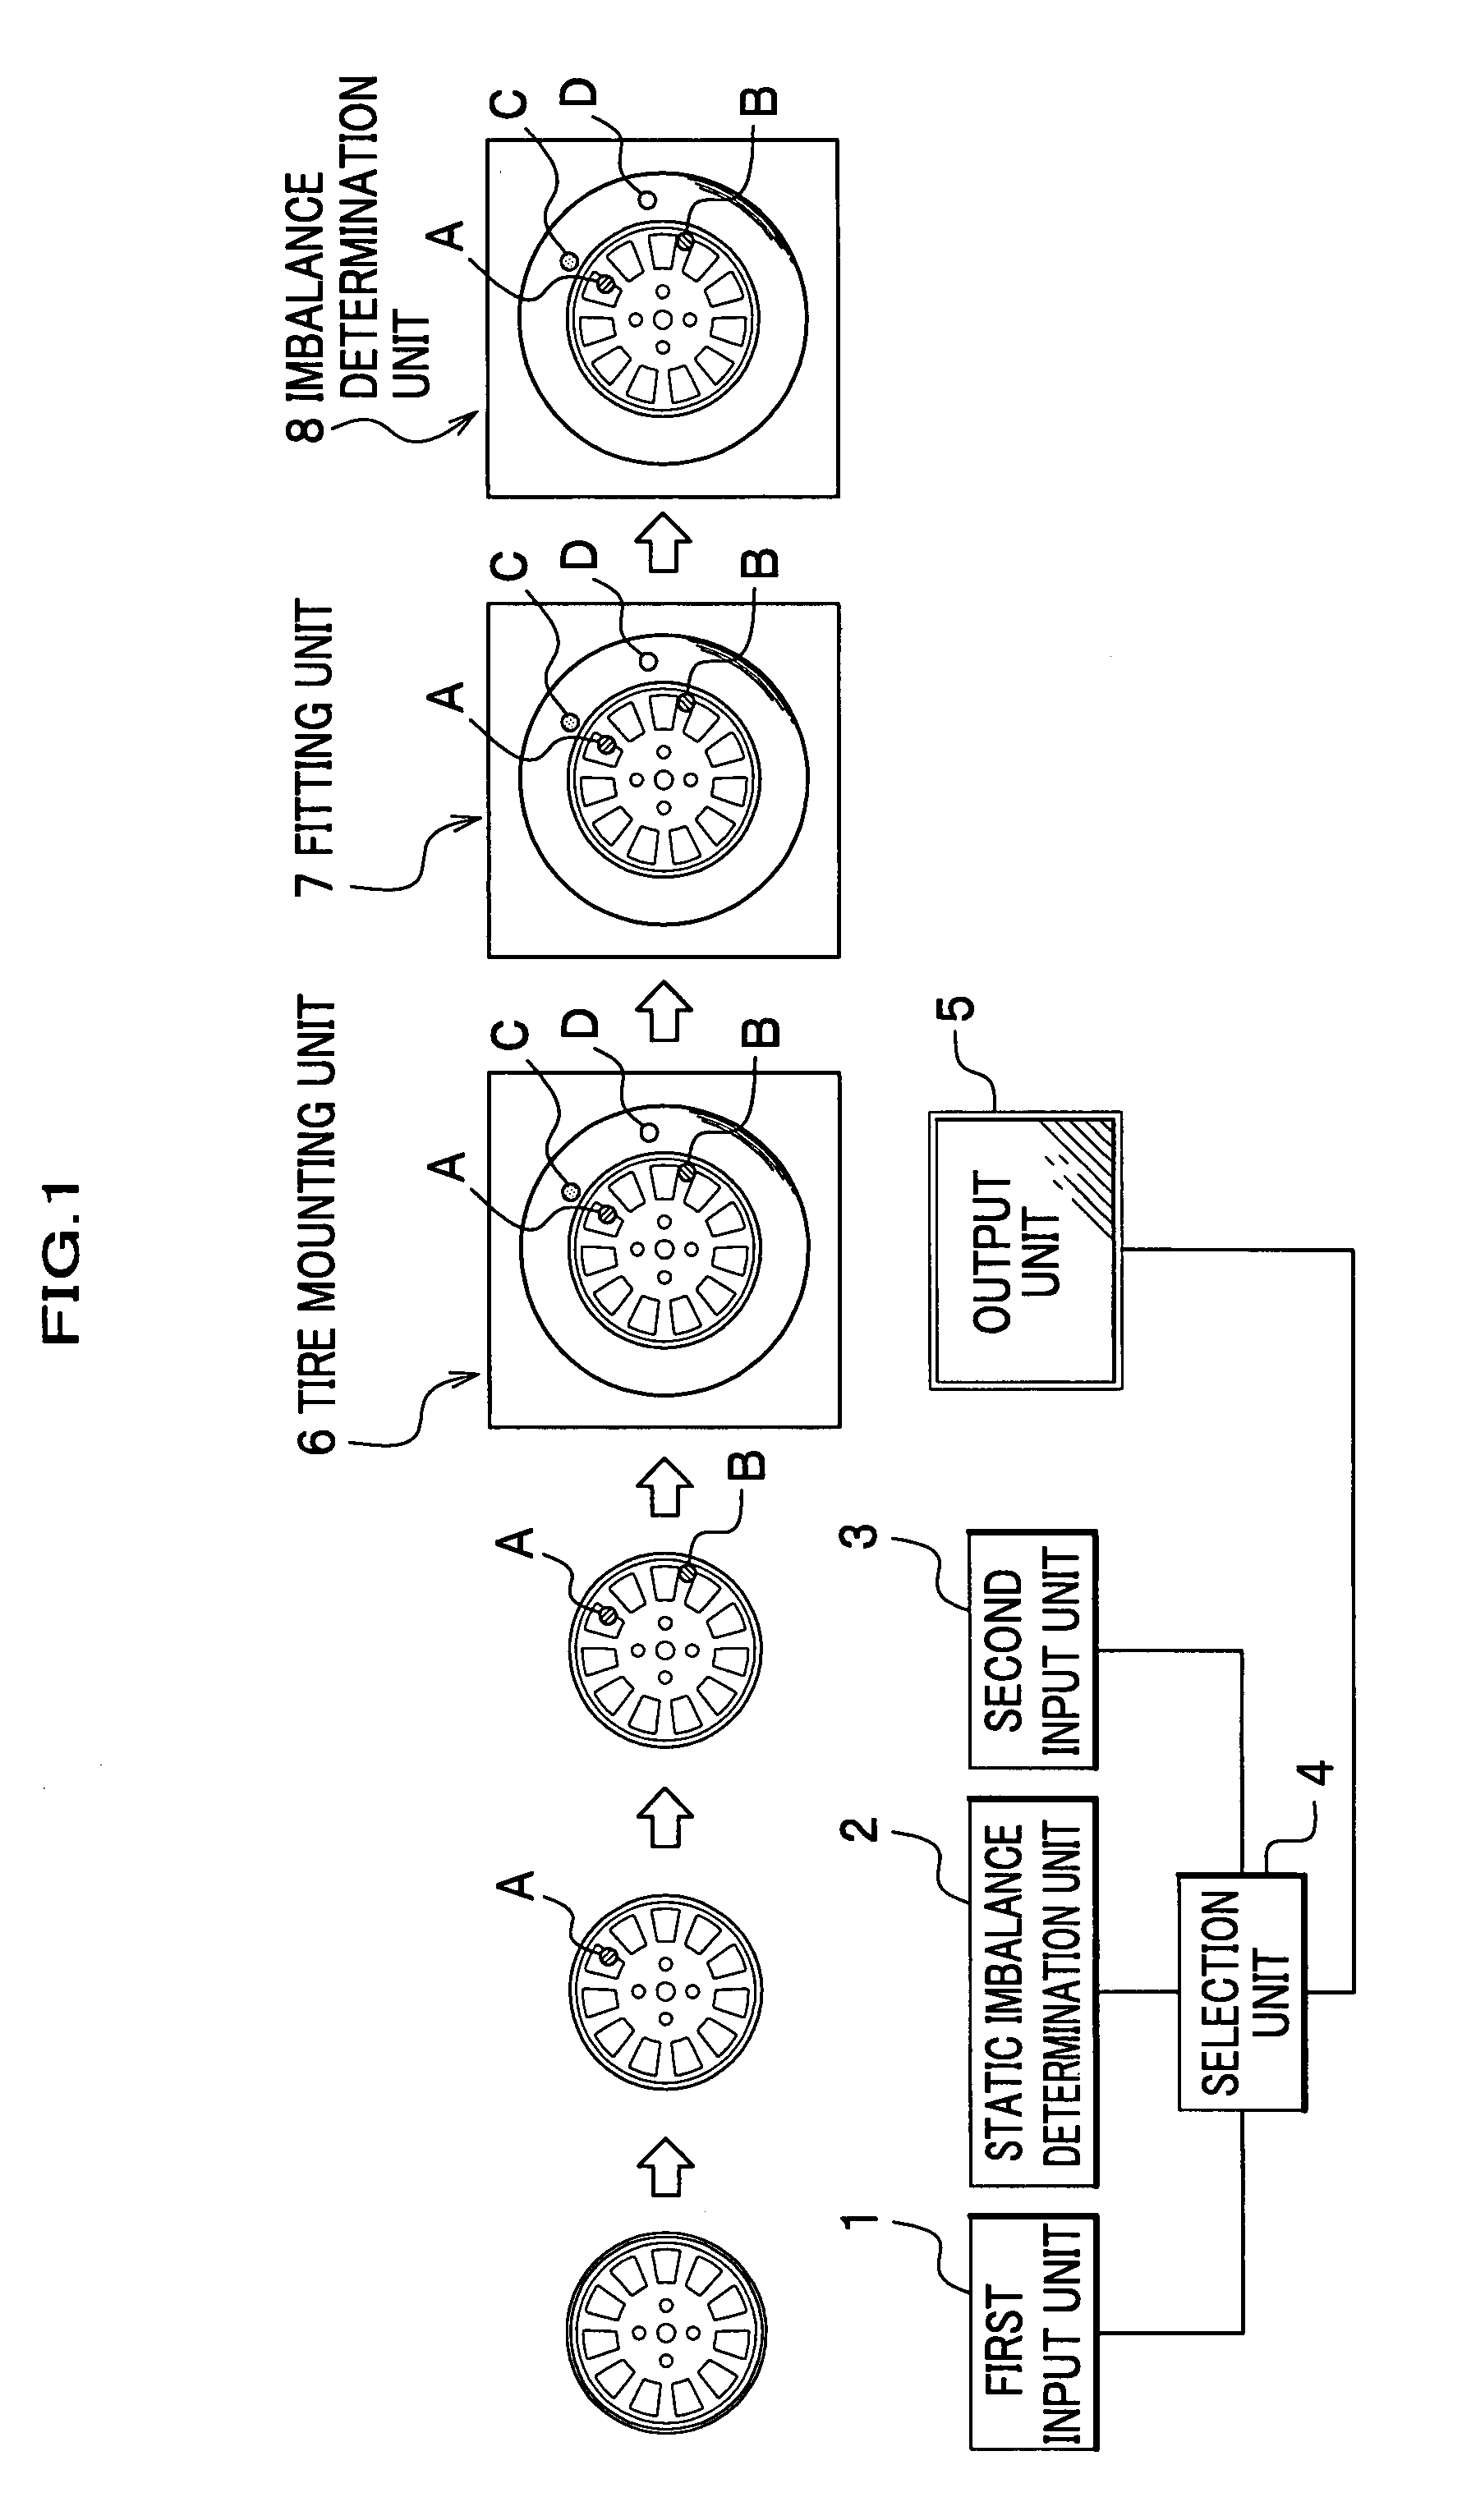 Apparatus and method for assembling tire and wheel based on rigidity and radial runout of wheel